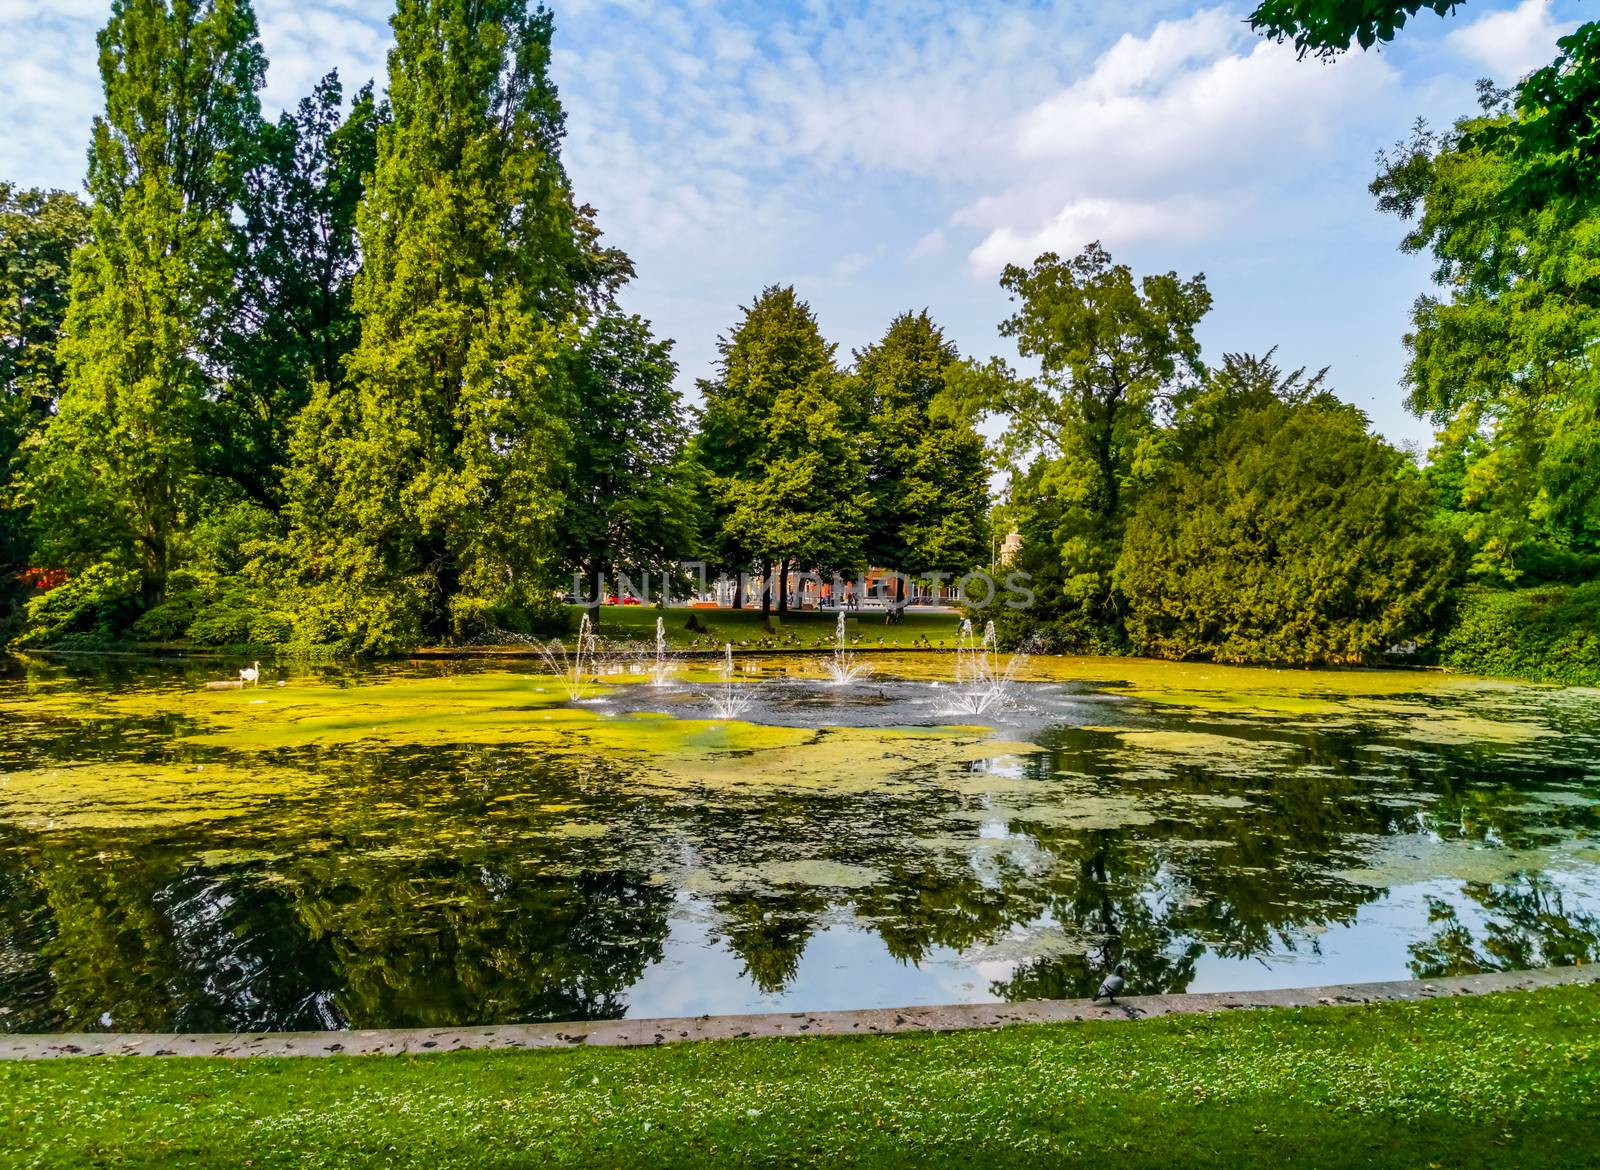 city park Valkenberg of breda with the pond and water fountains, Nature scenery of the Netherlands by charlottebleijenberg